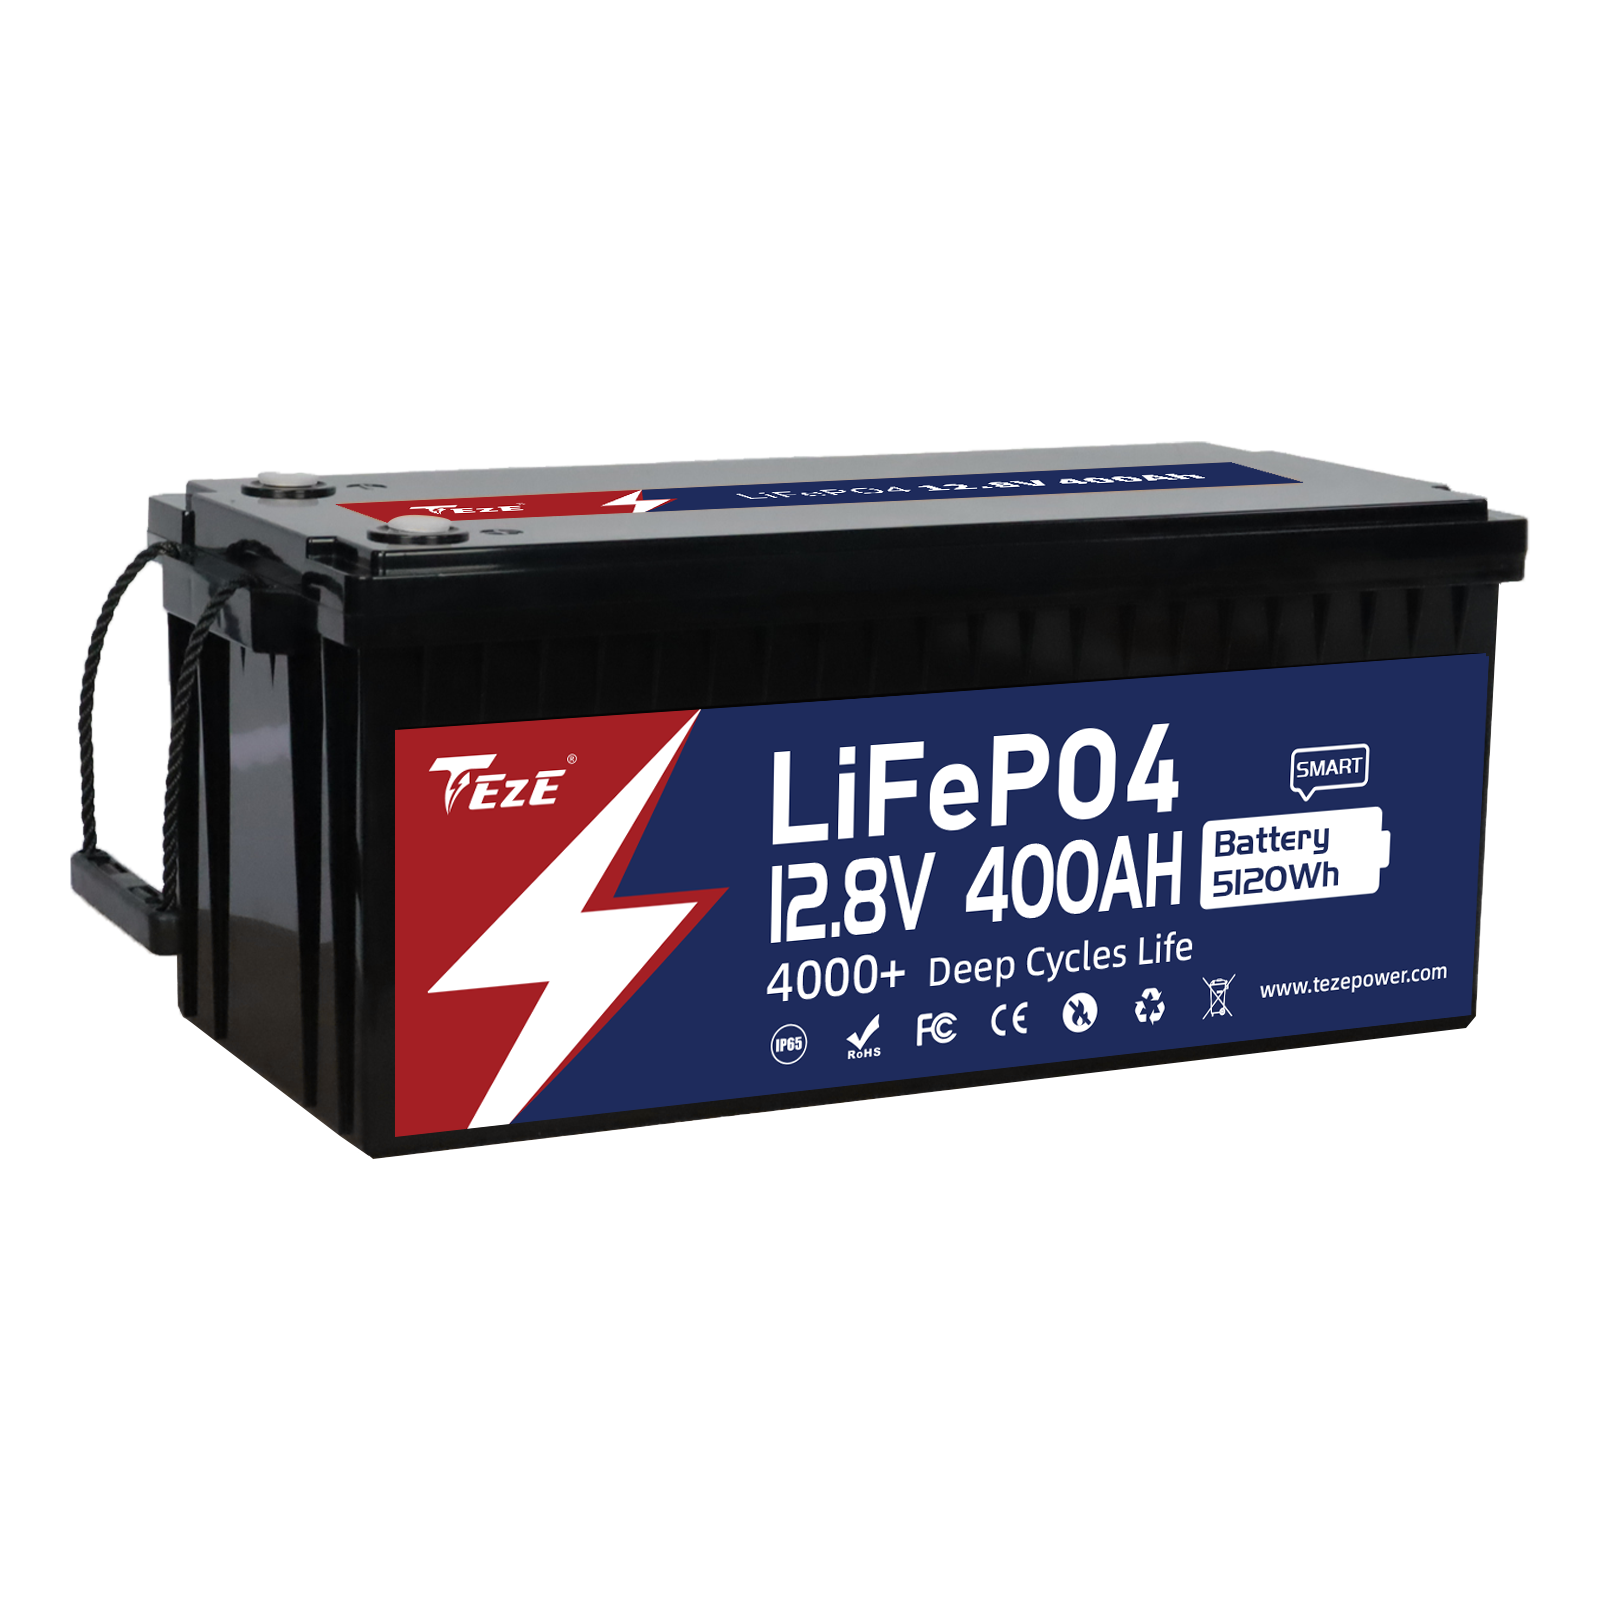 TezePower 12V 400Ah LiFePO4 Battery with Bluetooth, Self-heating and Active  Balancer, Built-in 250A Daly BMS(Bluetooth Built-in Version)